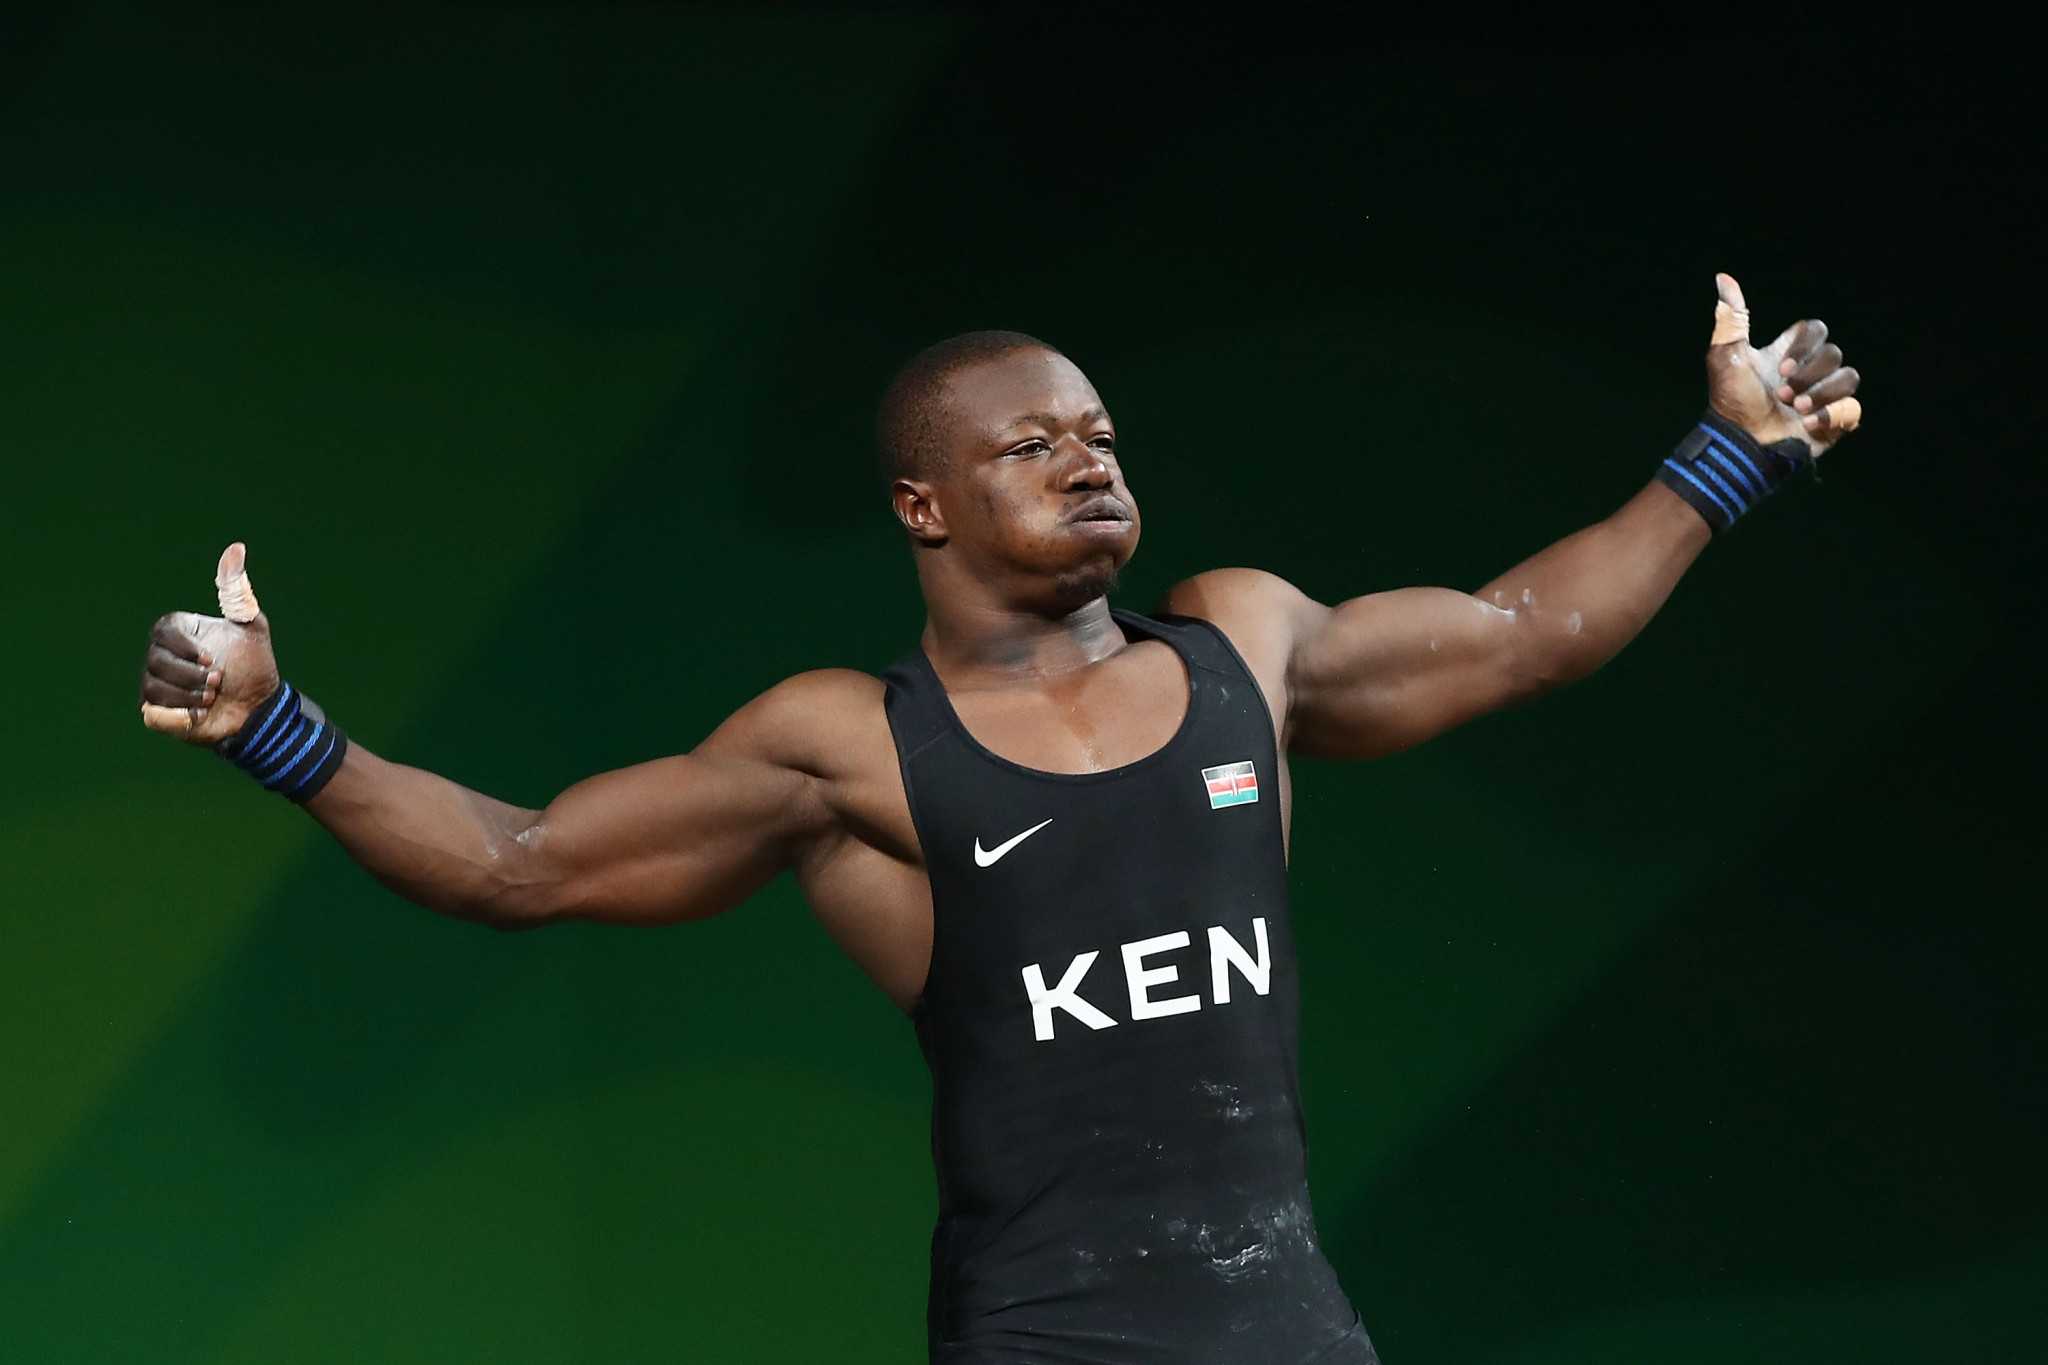 Kenya named as host of African Junior and Youth Weightlifting Championships